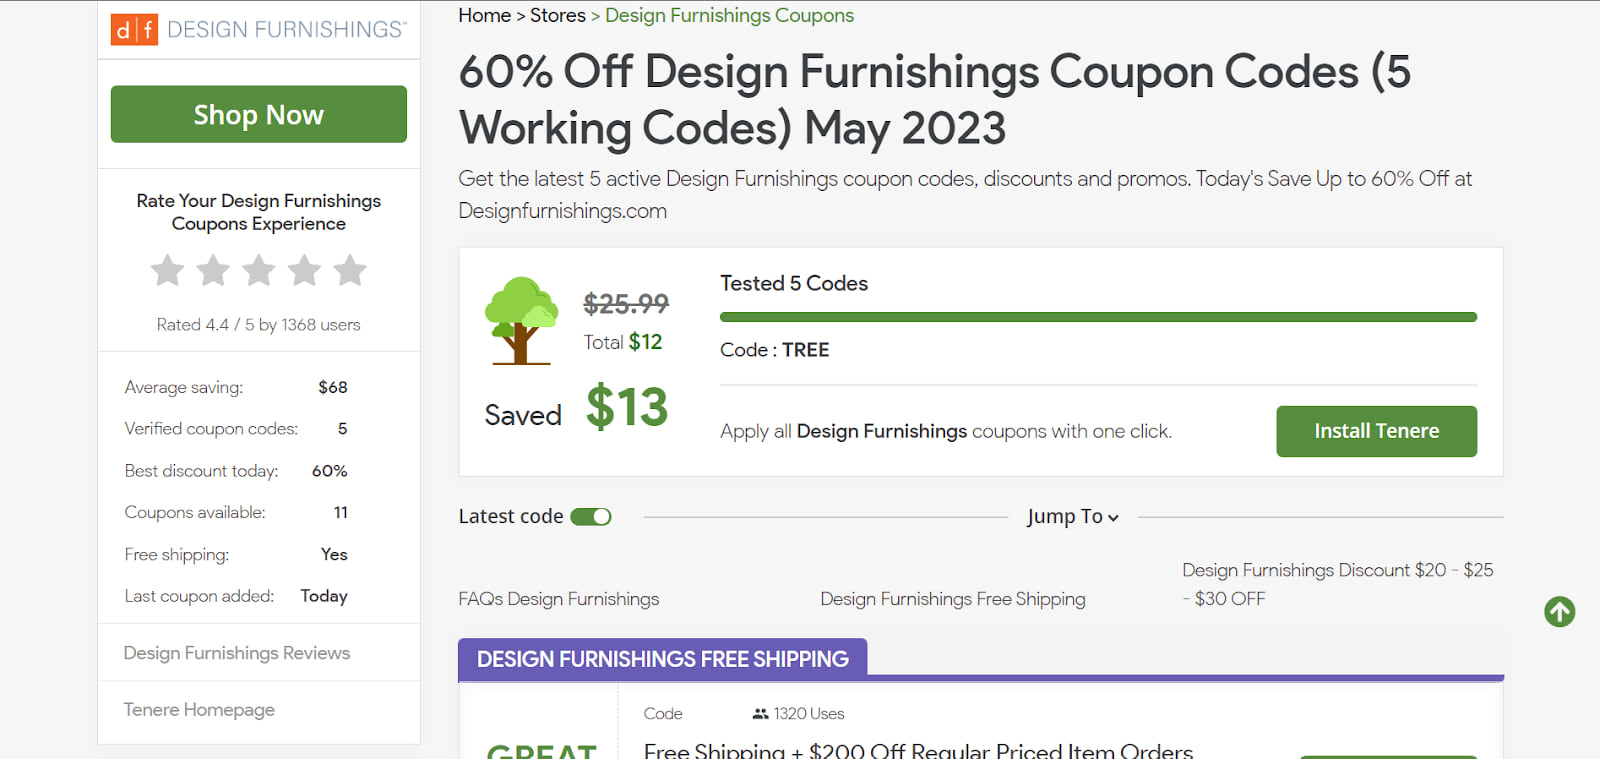 How To Use Design Furnishings Coupon Code 3